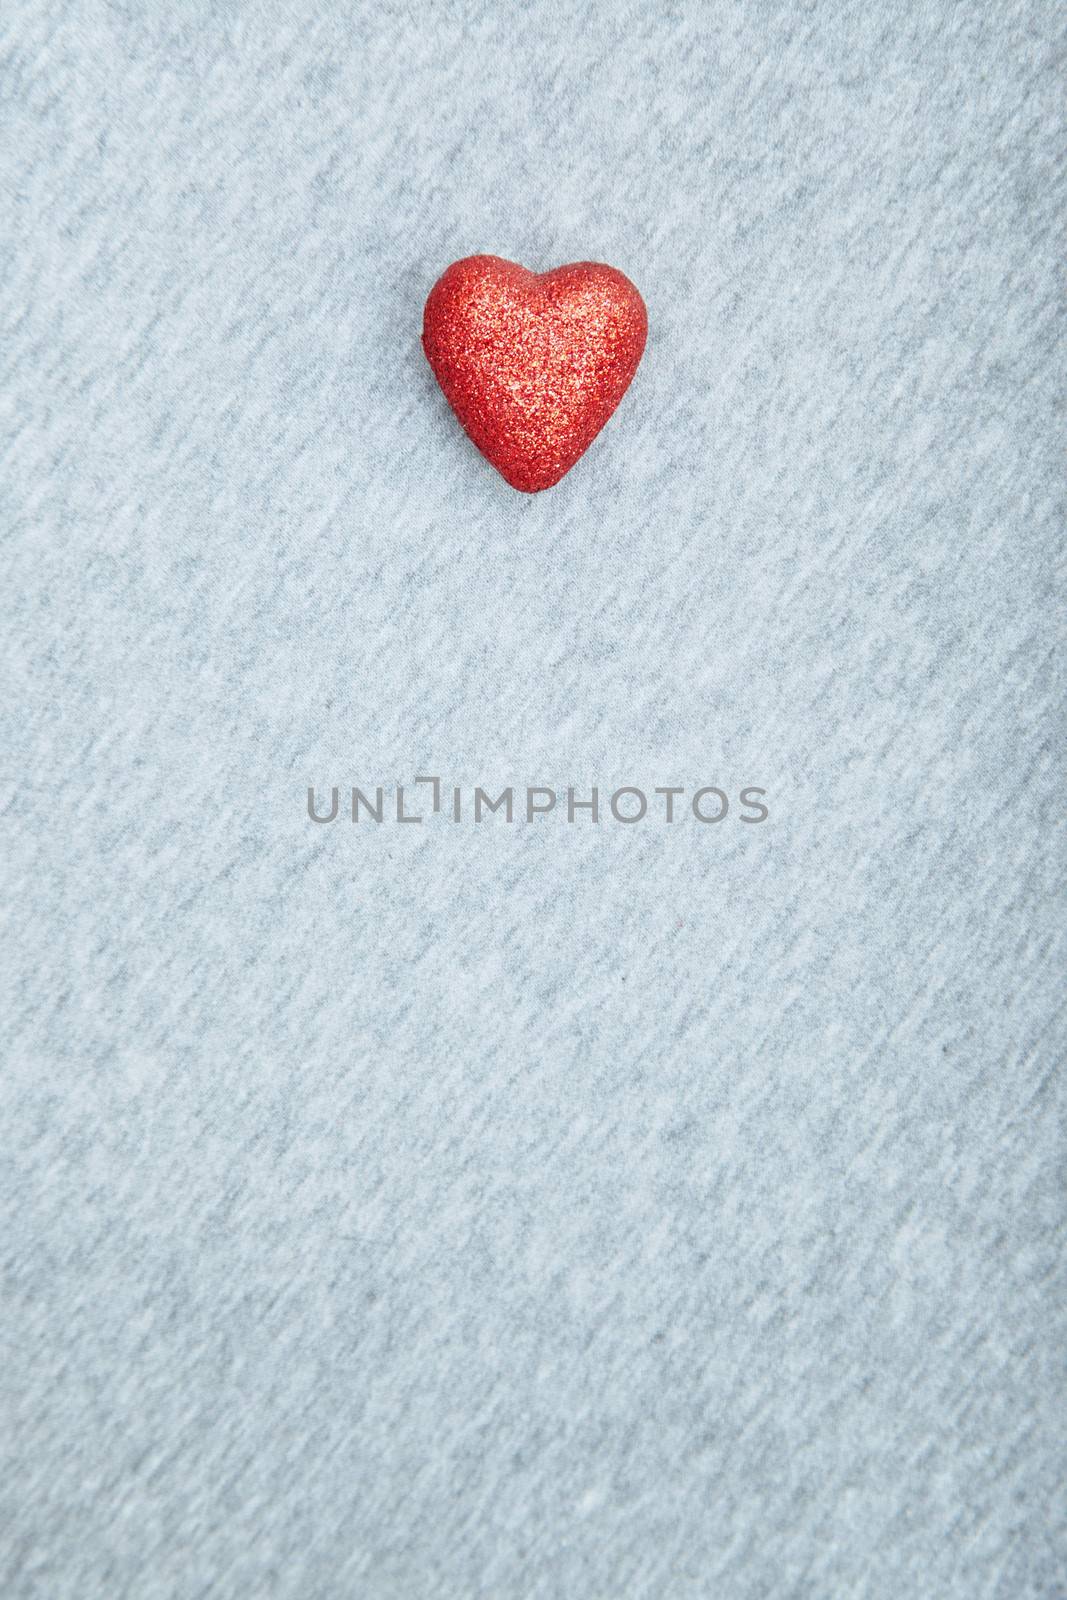 Red heart of love on a textured background